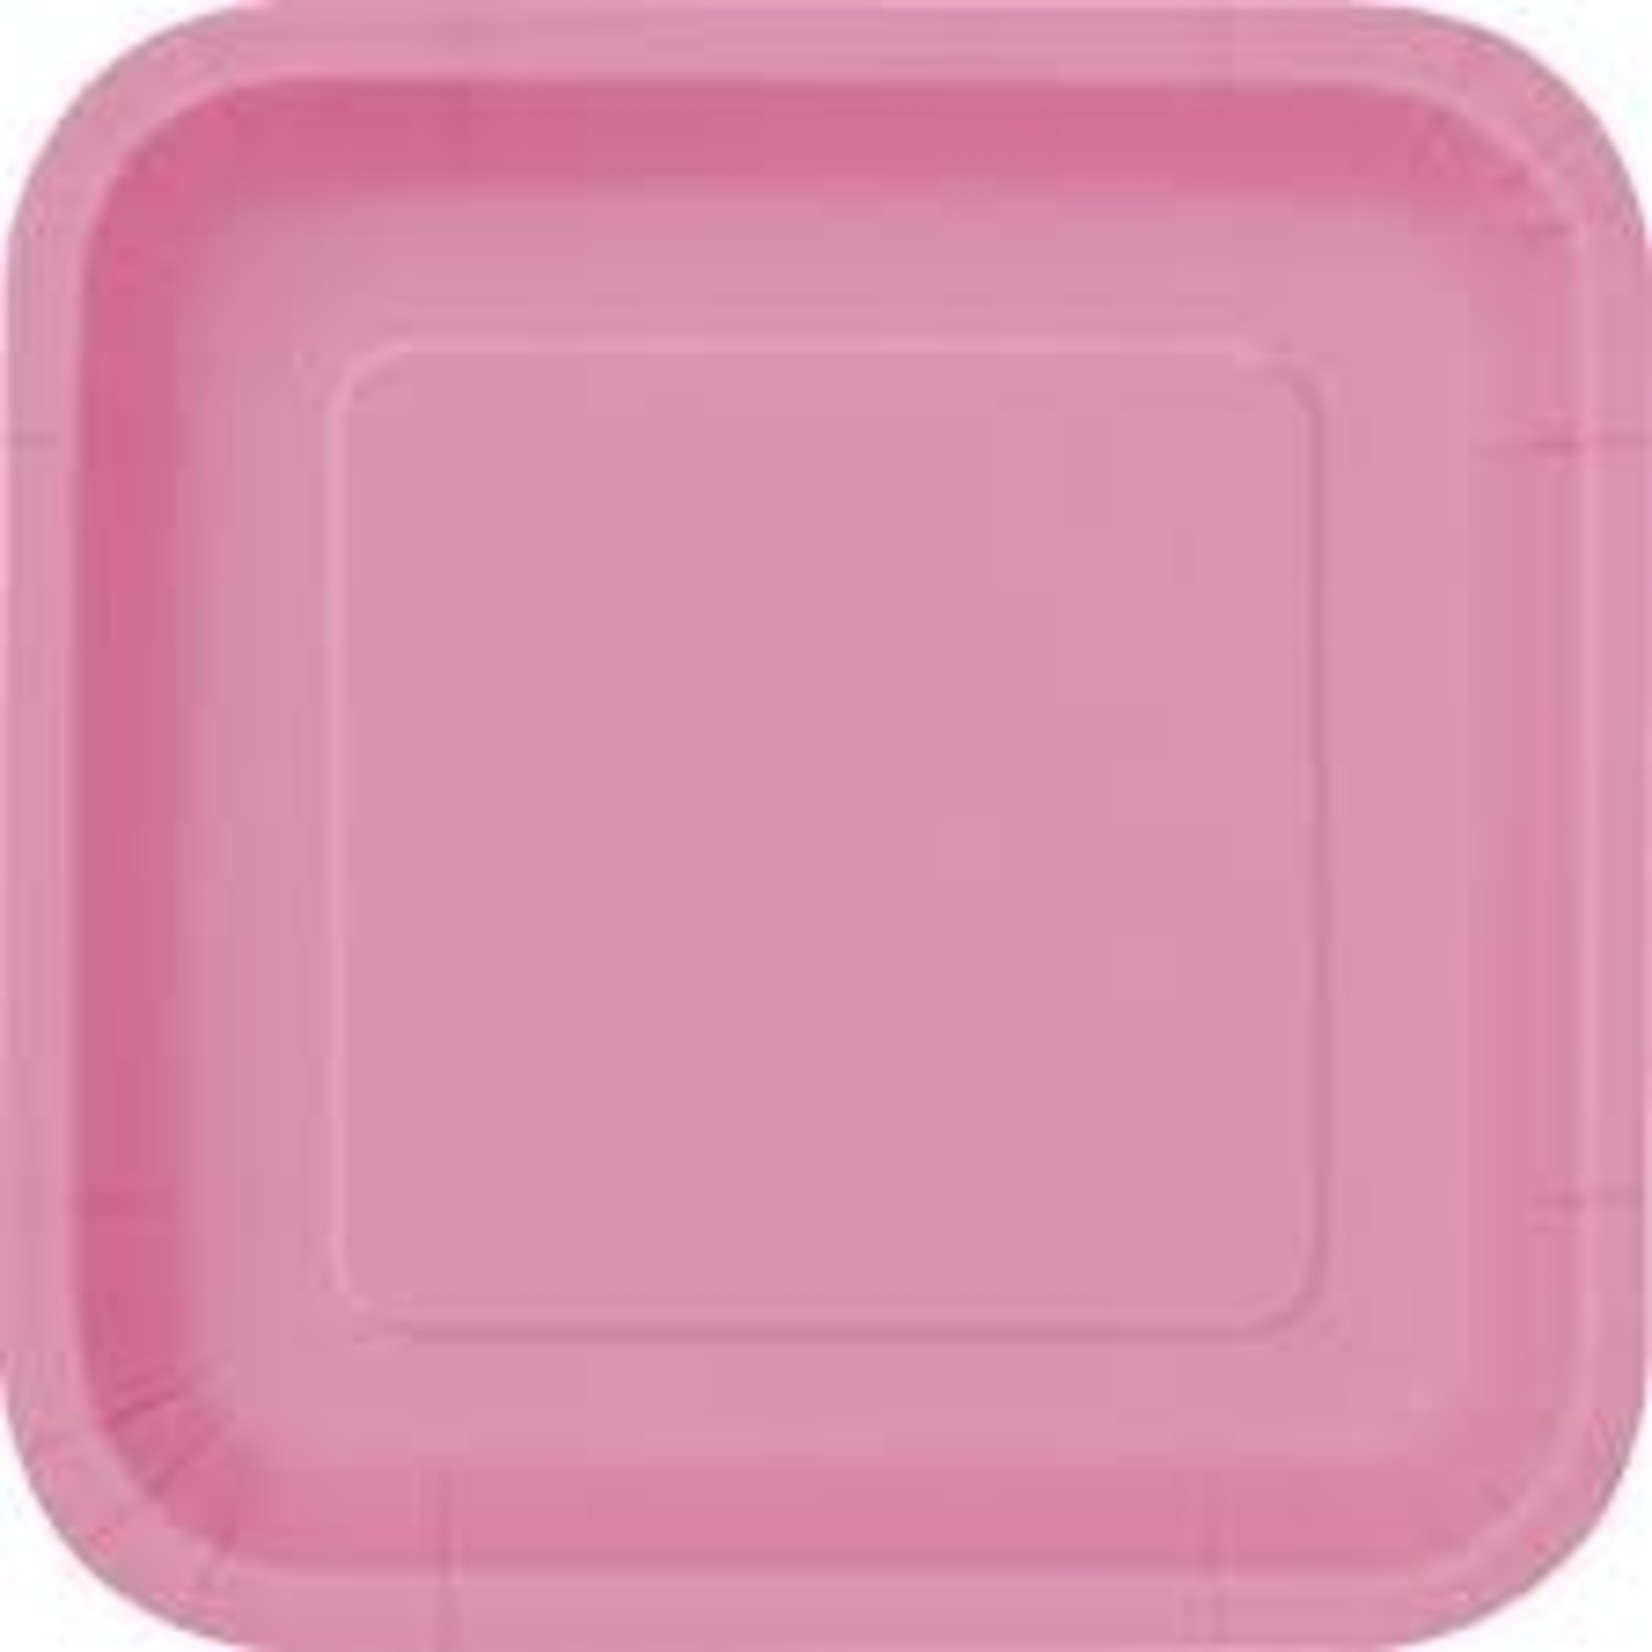 Hot Pink Square Plates 14ct